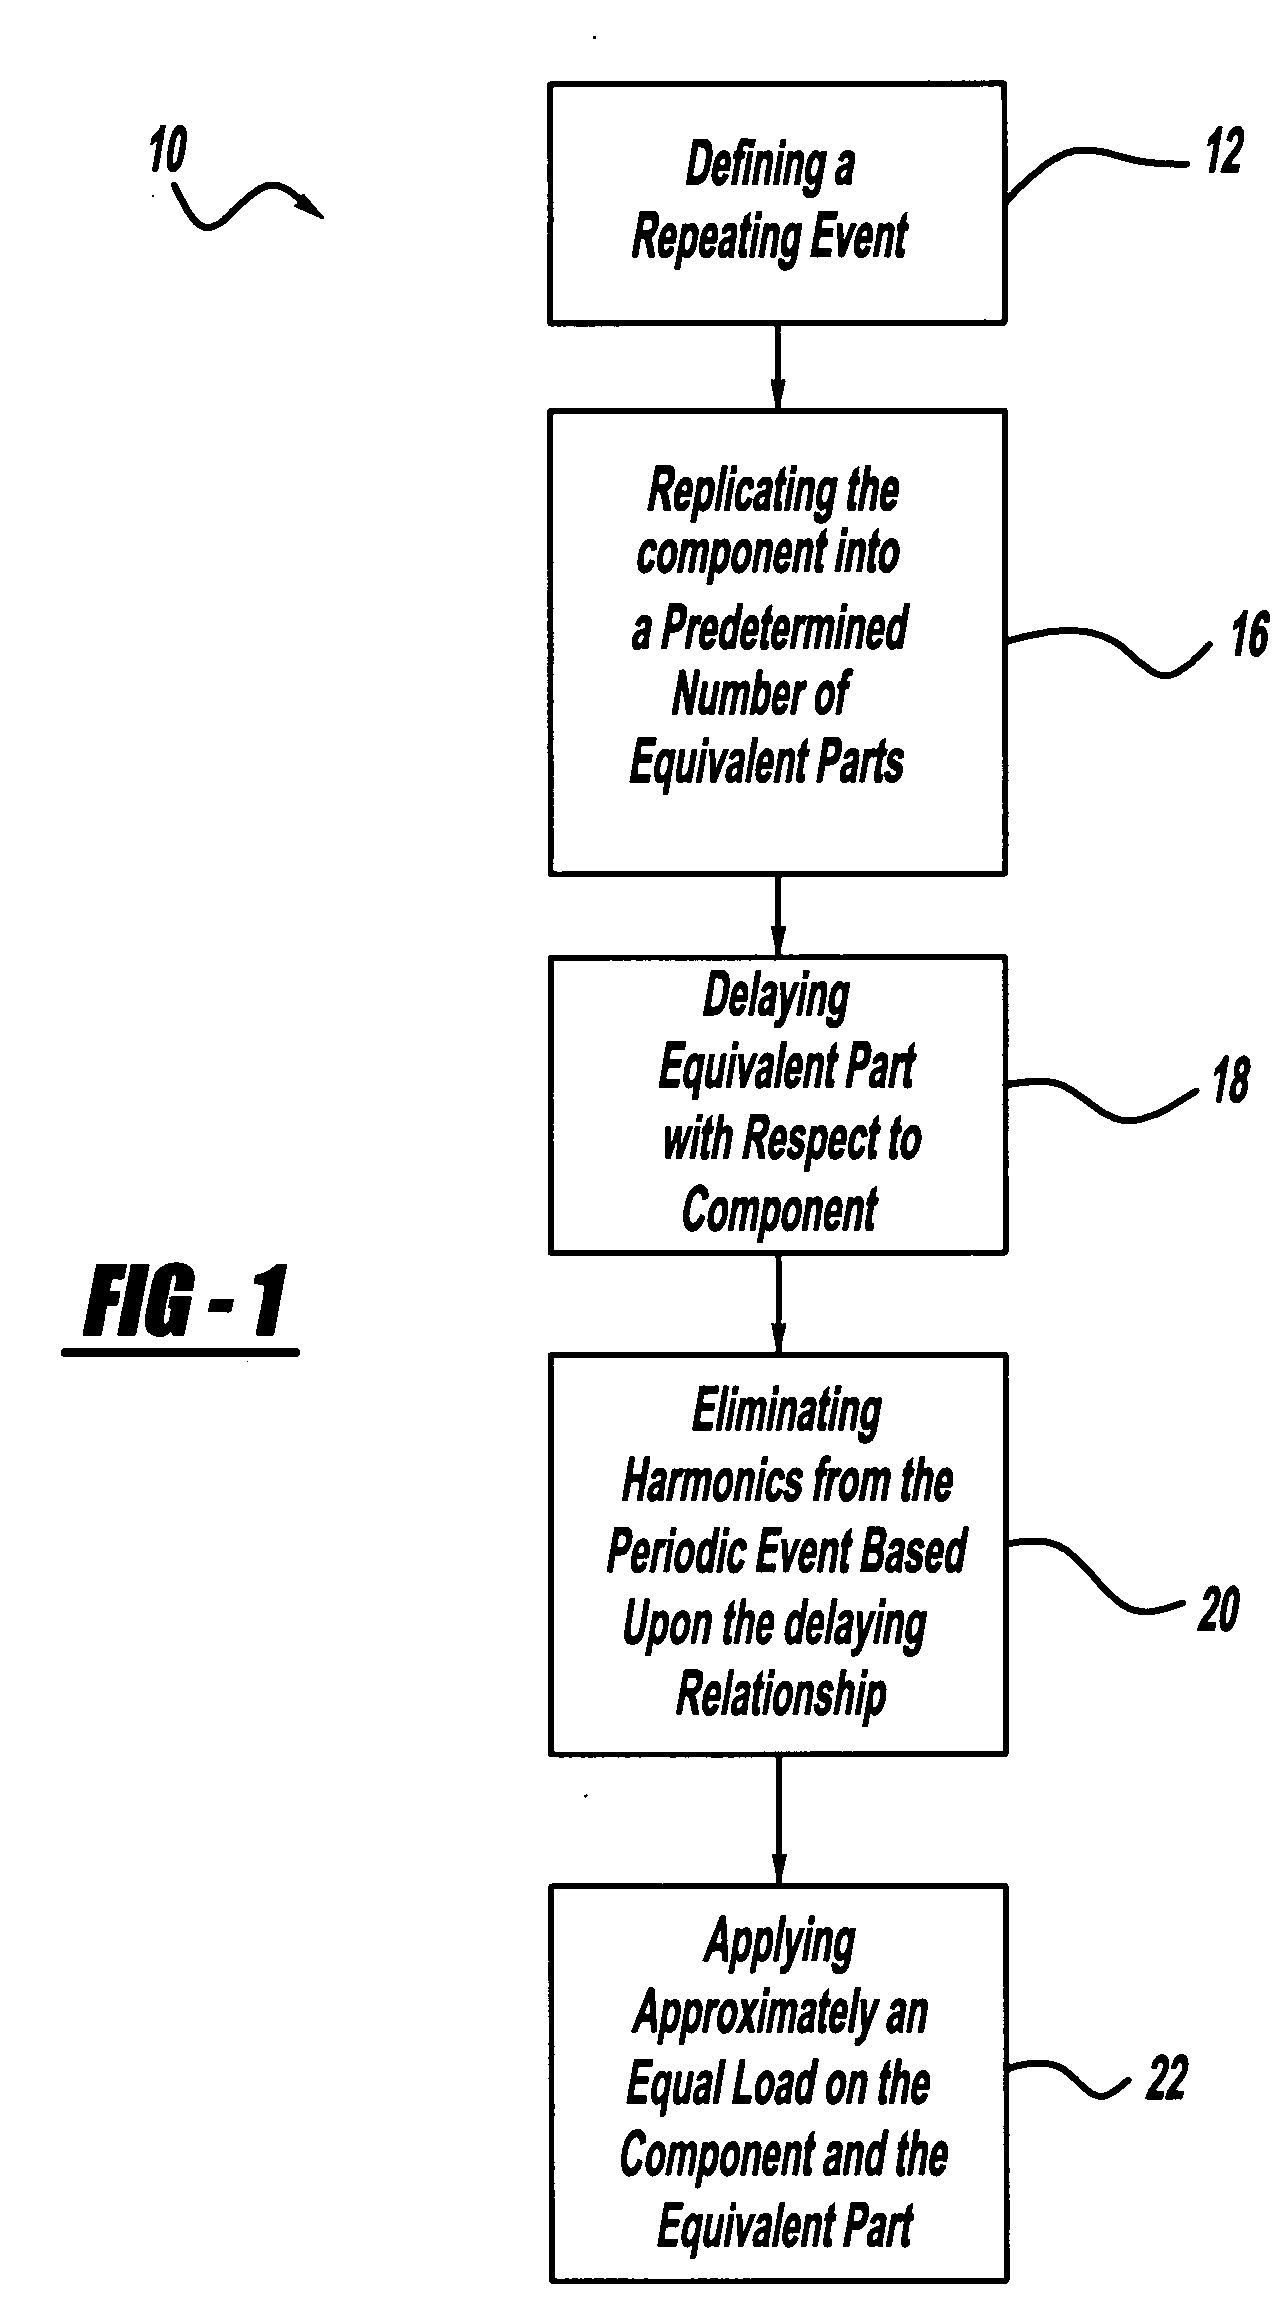 Phasing of chains, sprockets, and gears to provide enhanced noise vibration and harshness reduction